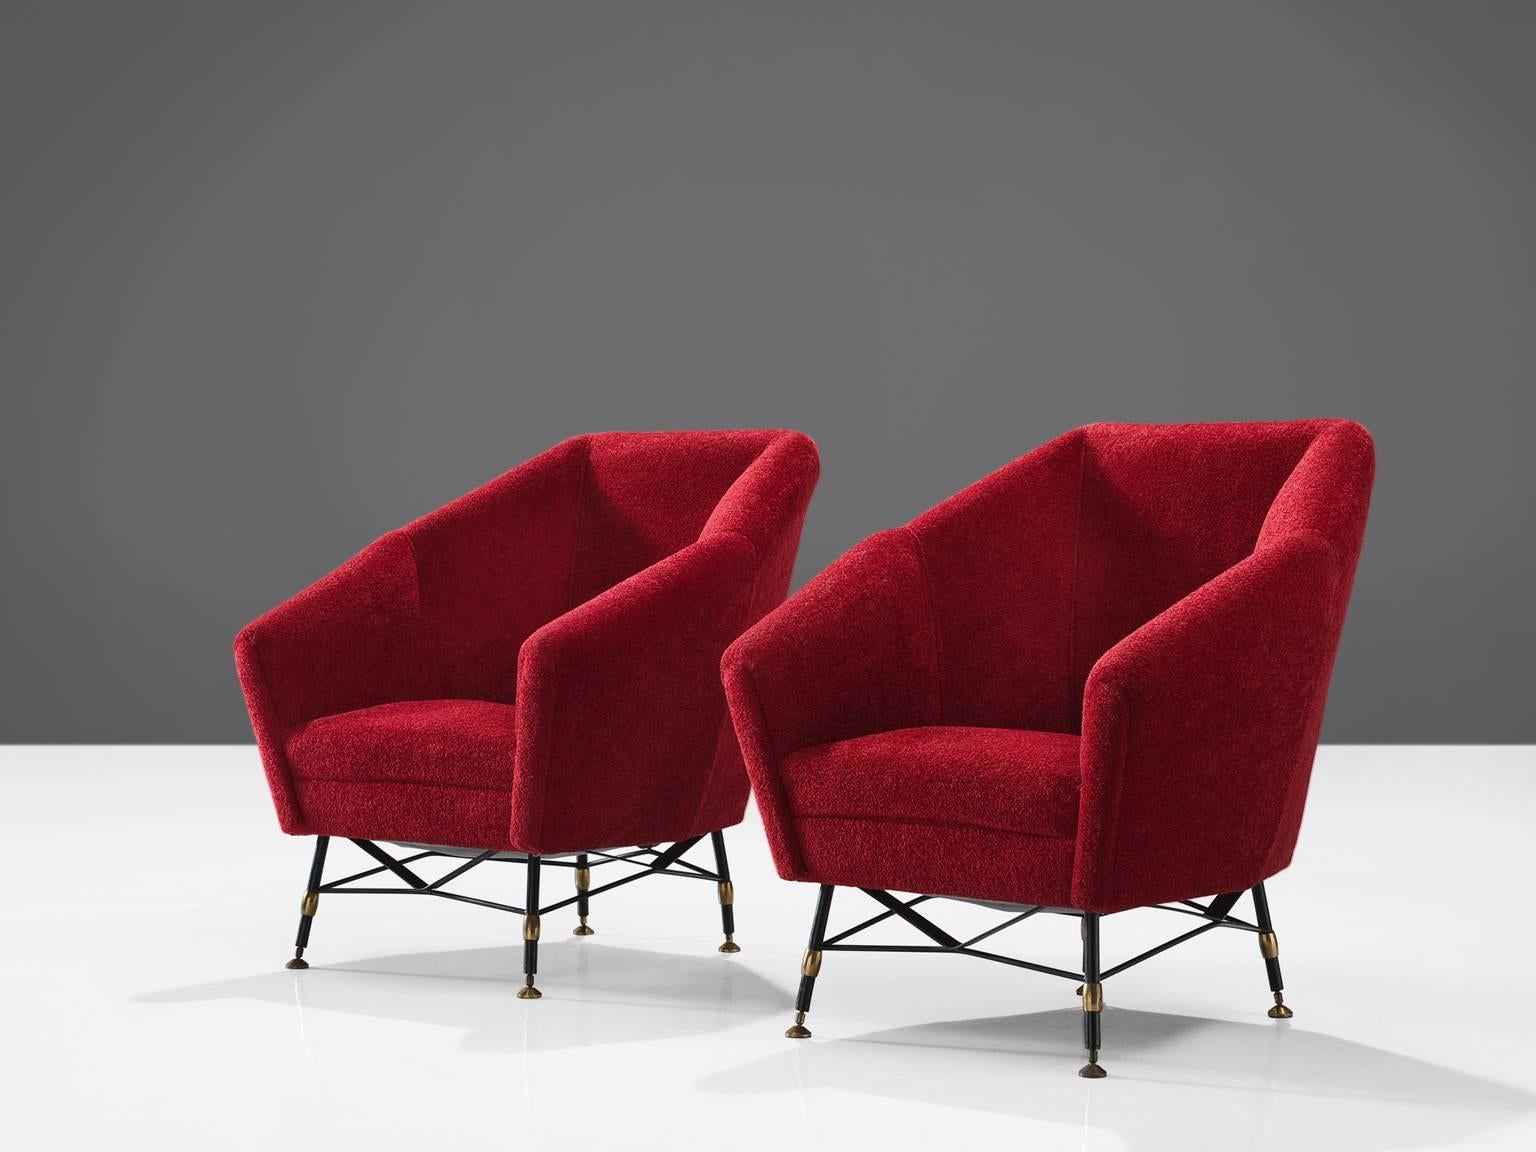 Lounge chairs, red fabric and metal, Italy, 1950s.

This is a straight set of lounge chairs upholstered with a bright red fabric. Designed and made in Italy in the style of Augusto Bozzi. Elegant organic shaped easy chair in red upholstery, made